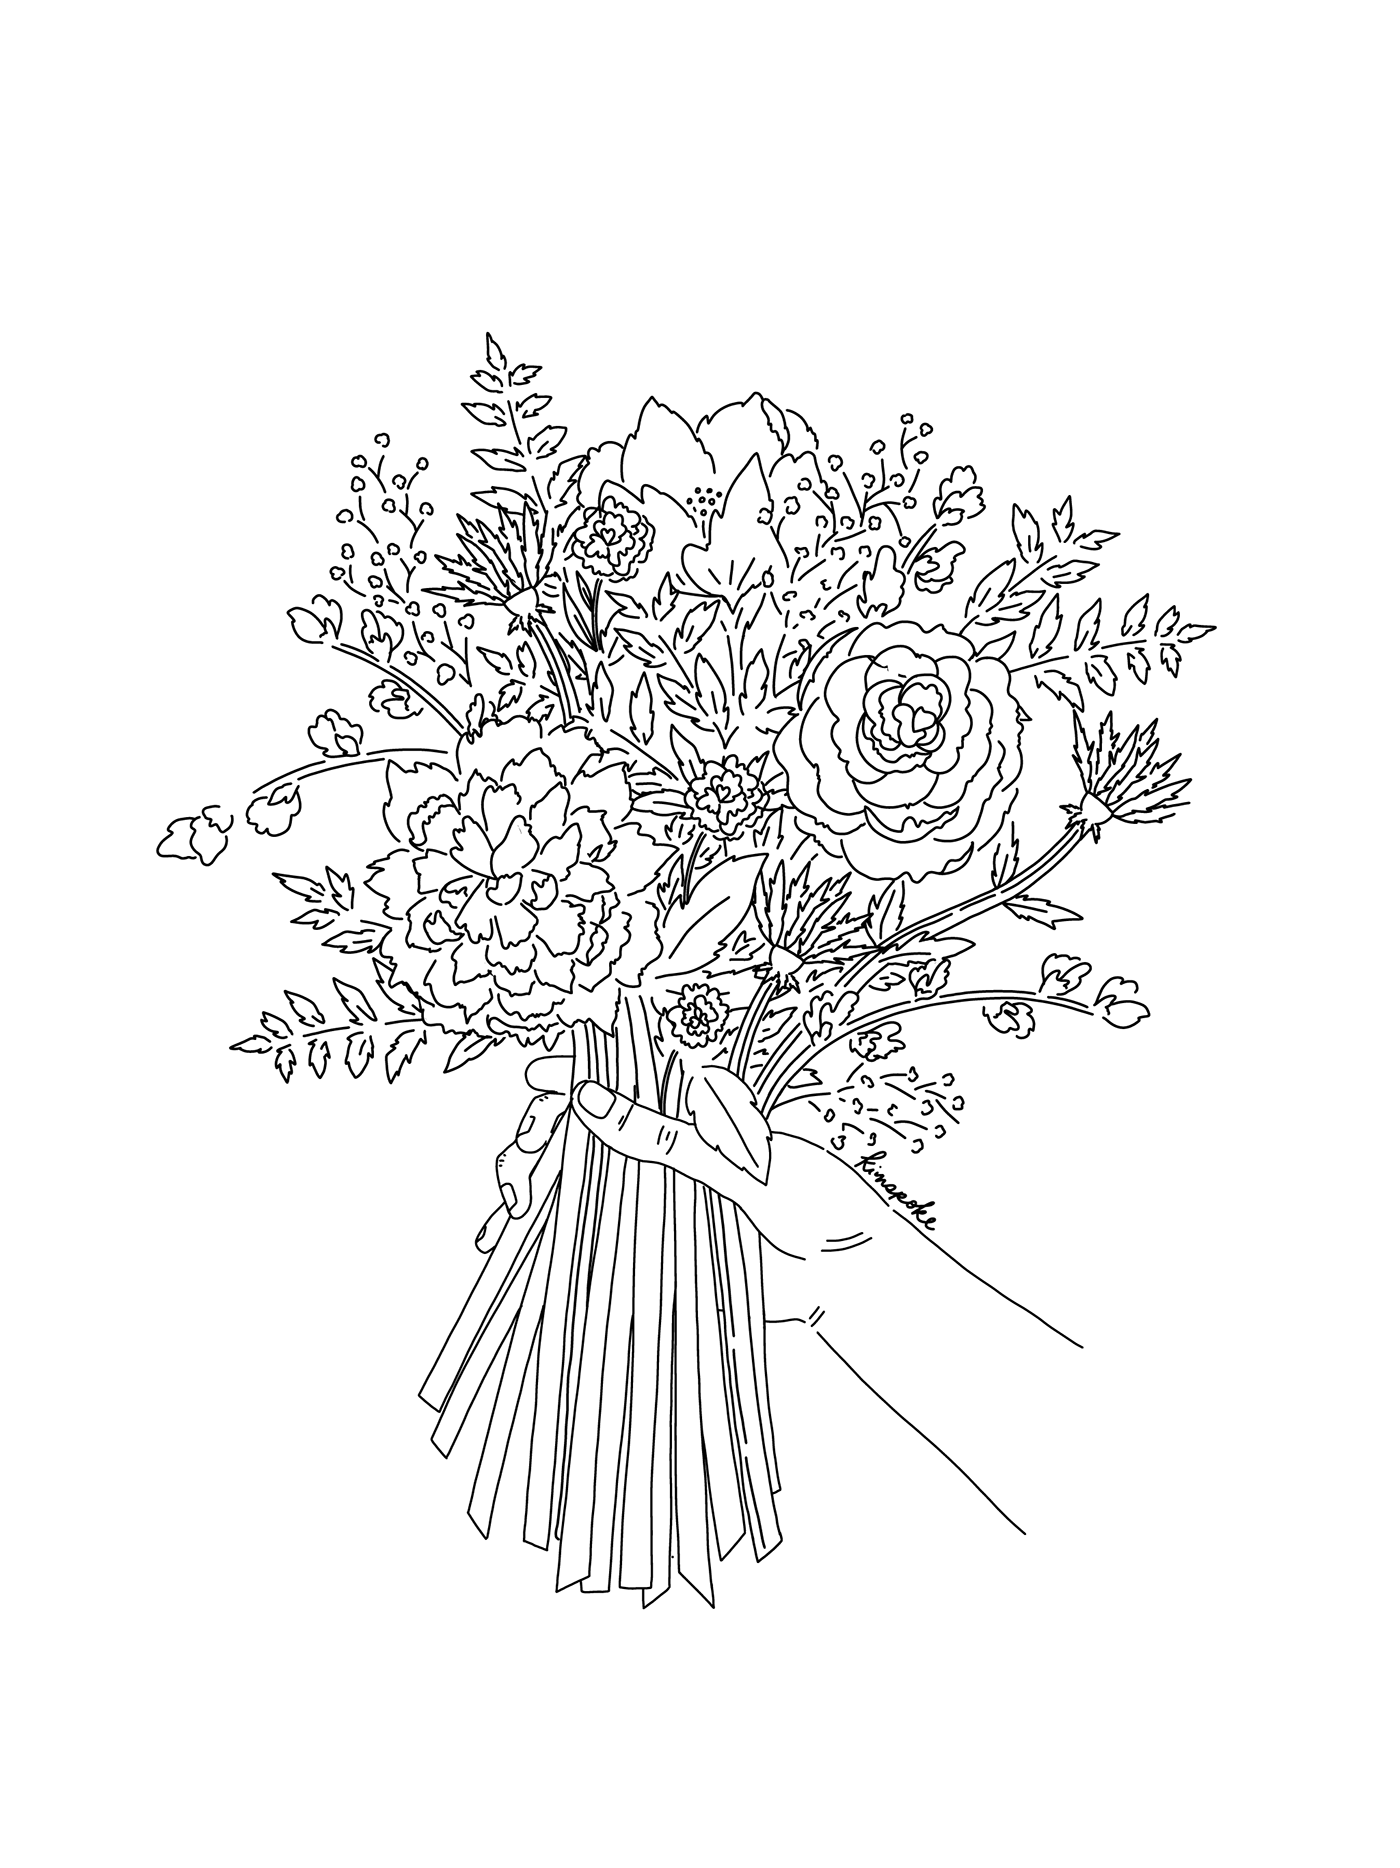 Illustration of Bouquet of Flowers